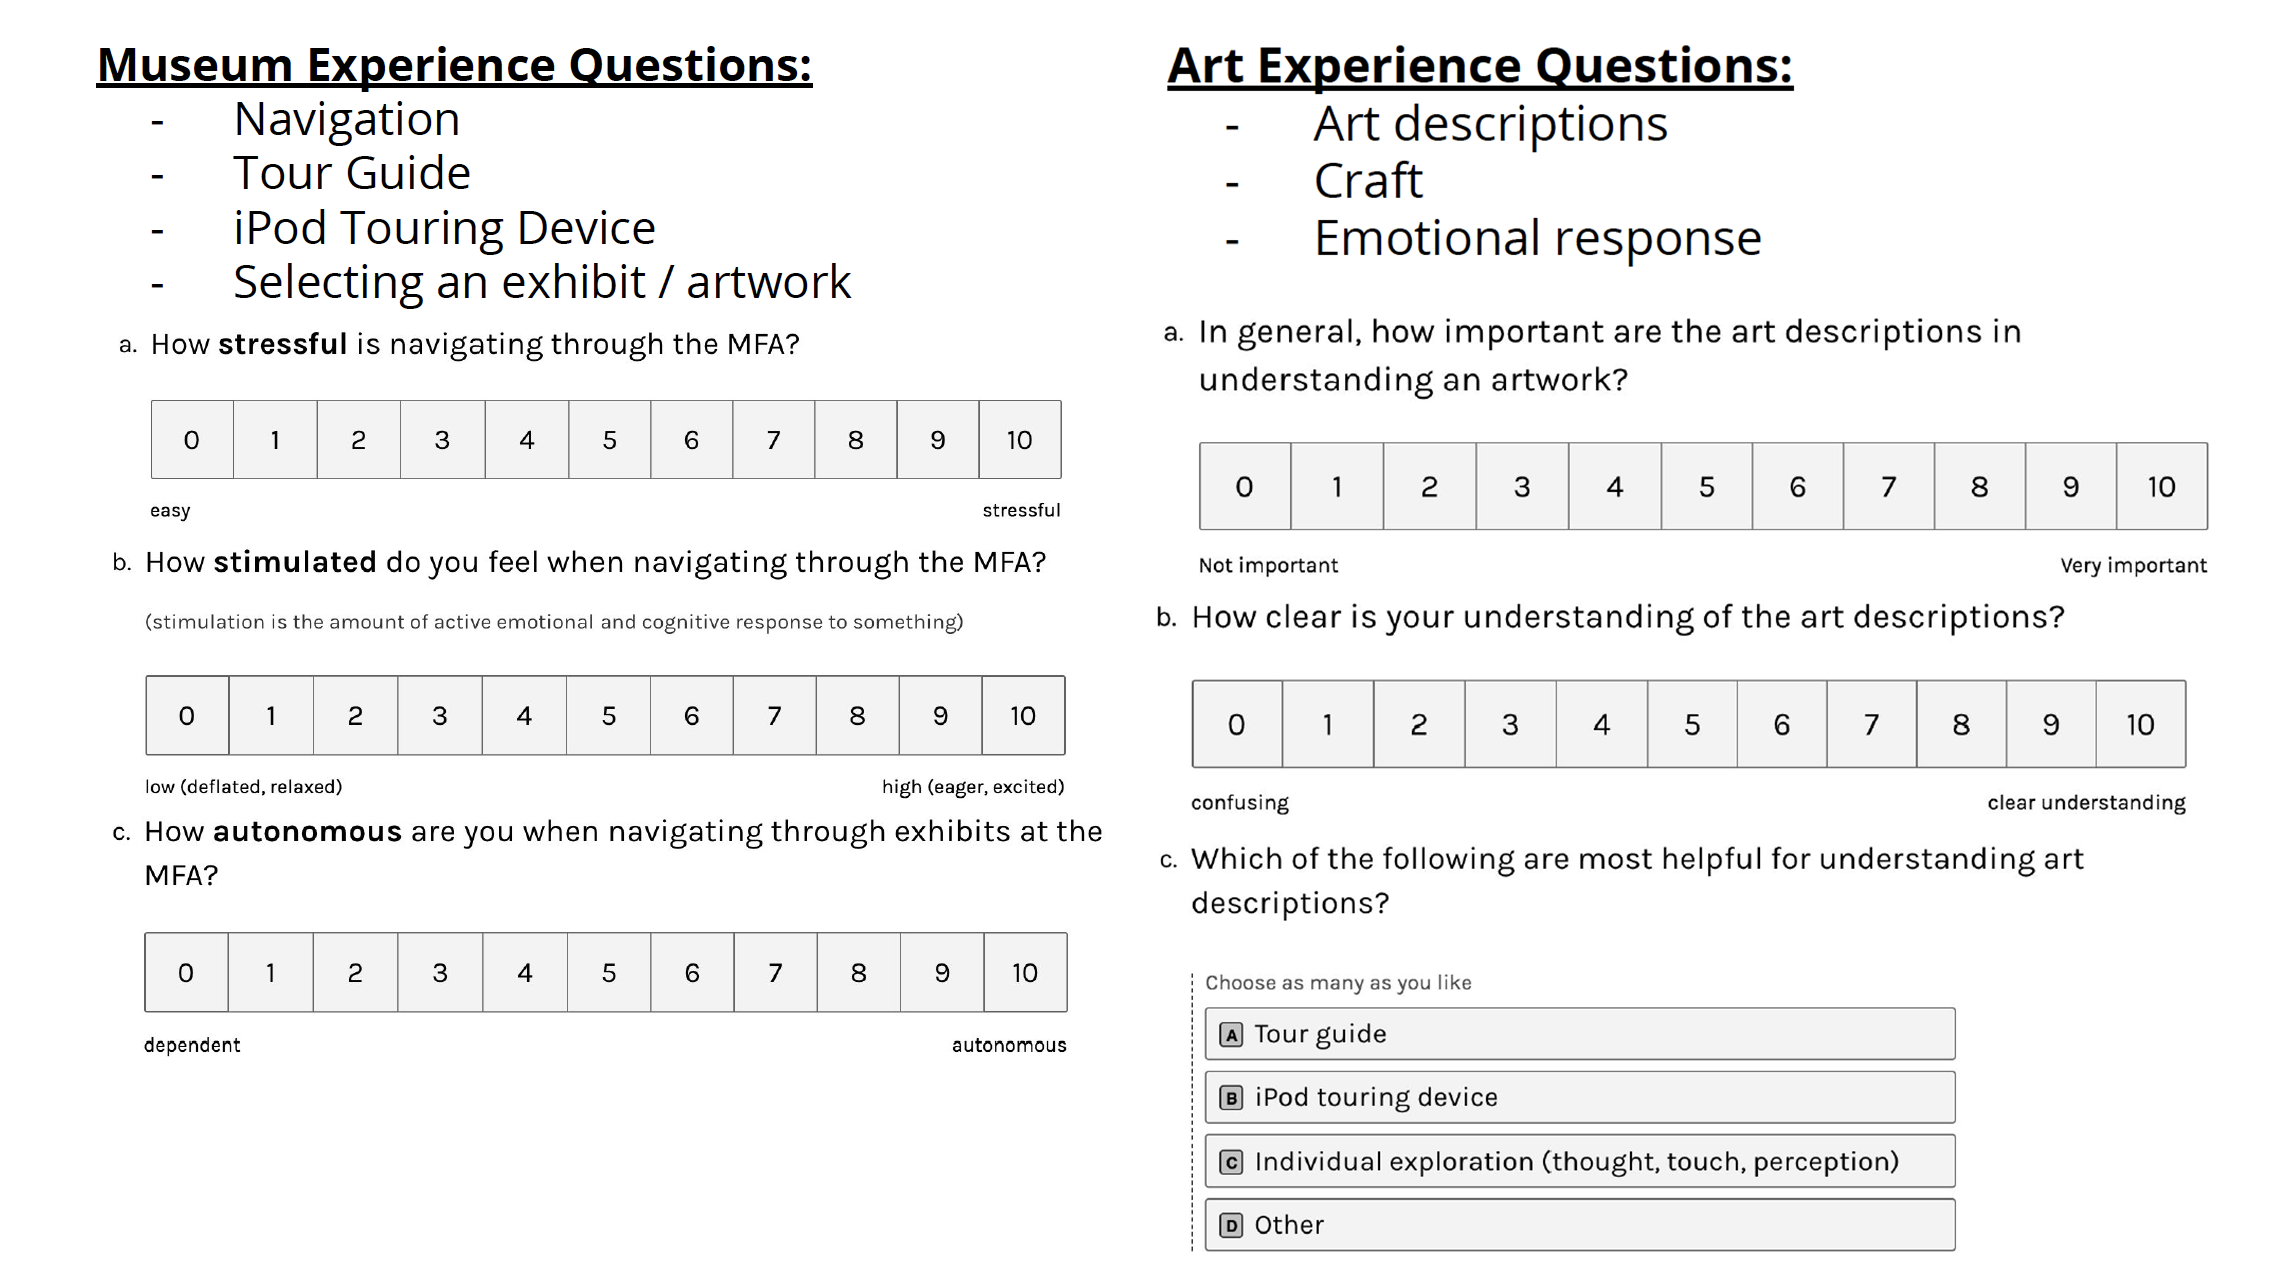 Screenshots of survey sent out to learn more about MFA visitors.